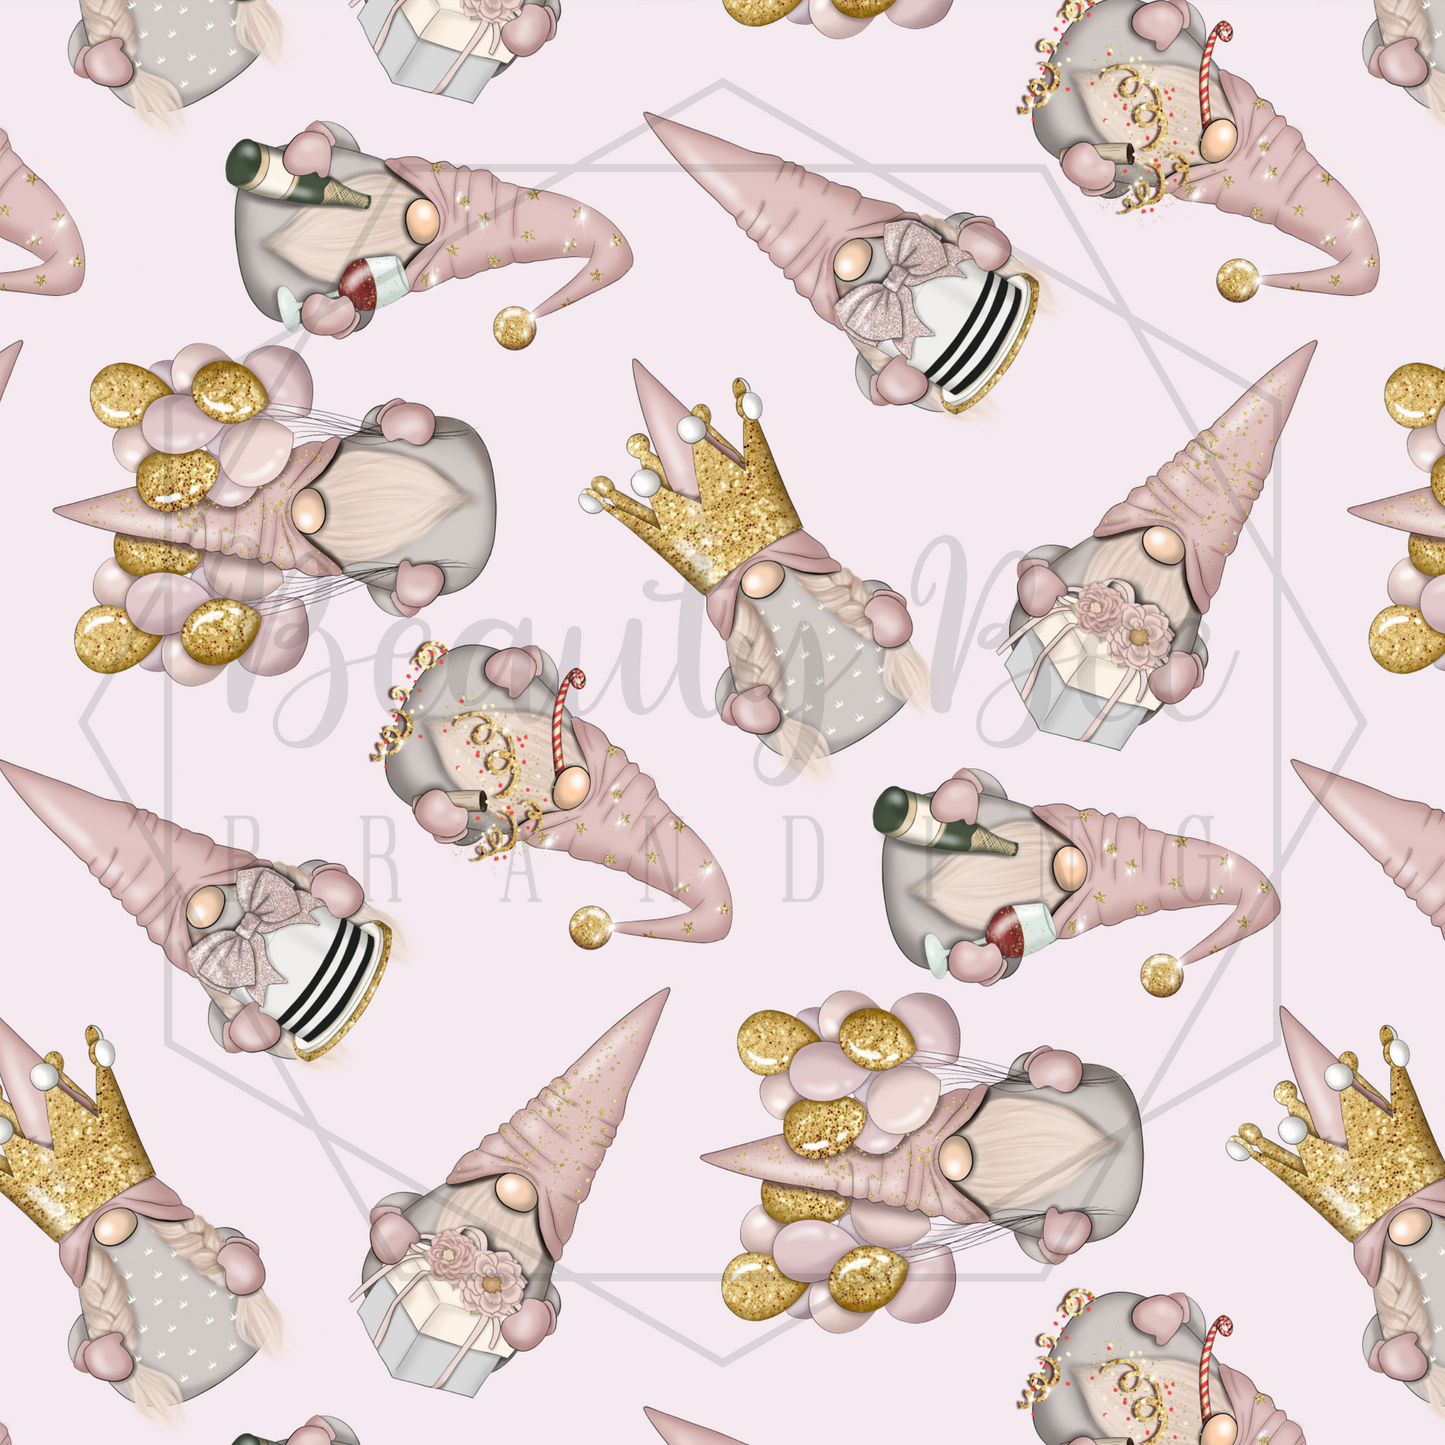 Party Gnomes SEAMLESS PATTERN